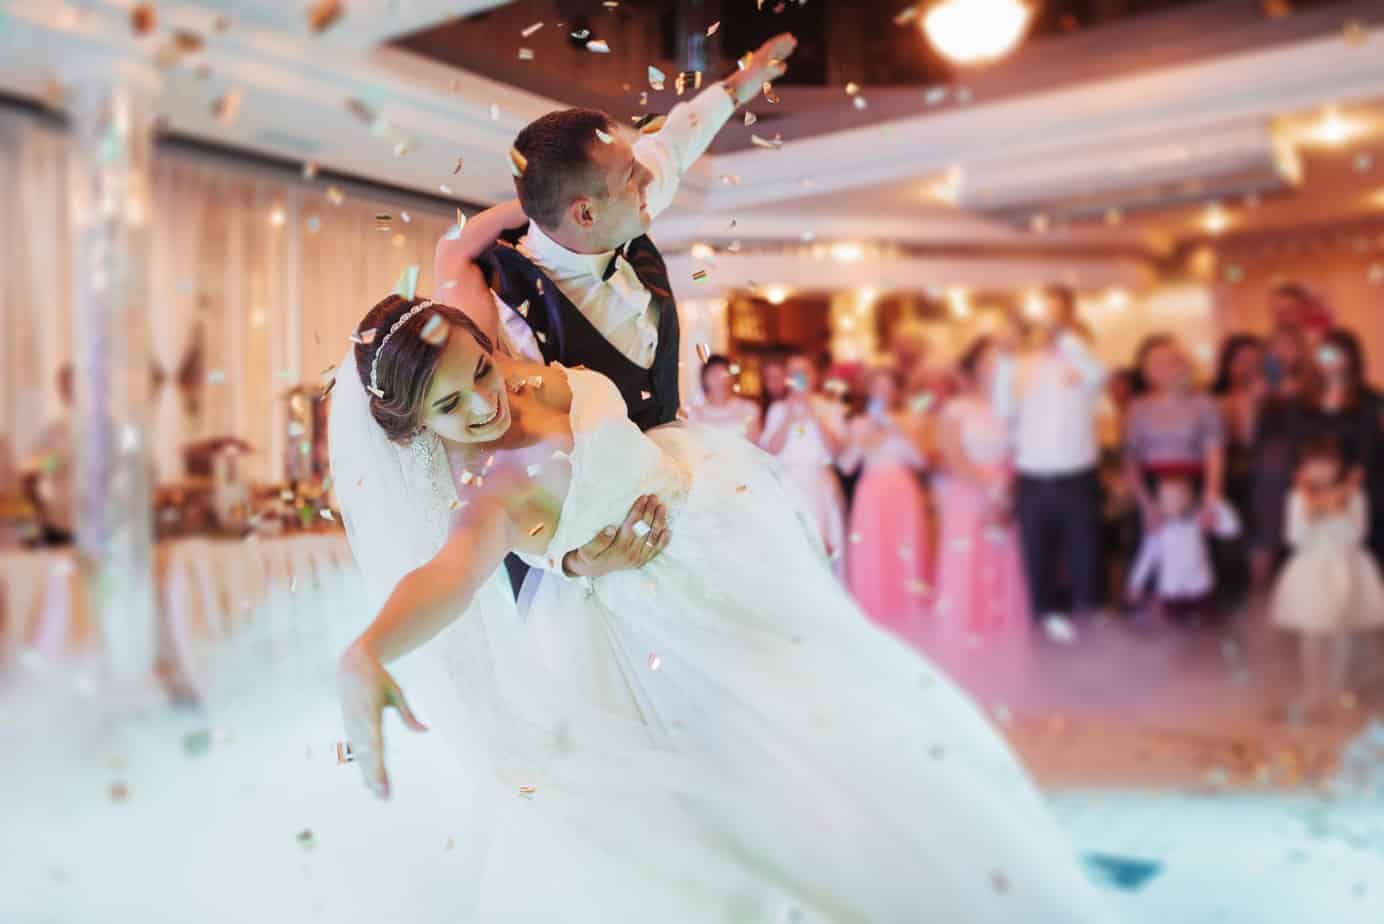 Top tips for dancing your first dance in your wedding dress